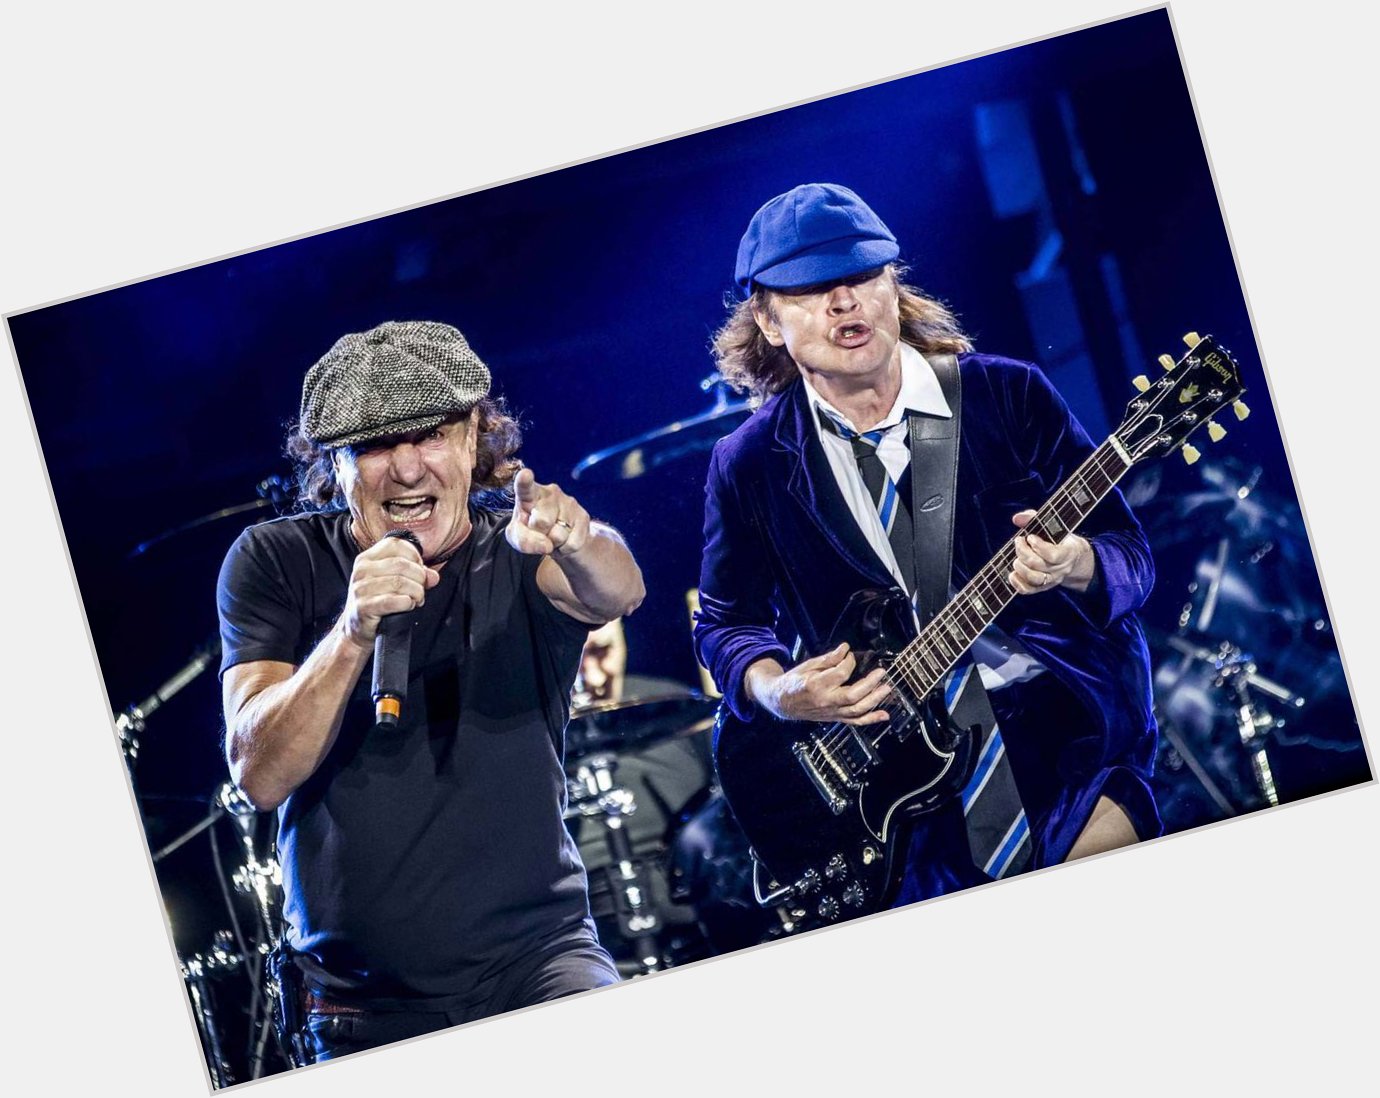  Happy birthday to singer Brian Johnson, born this day in 1947! 